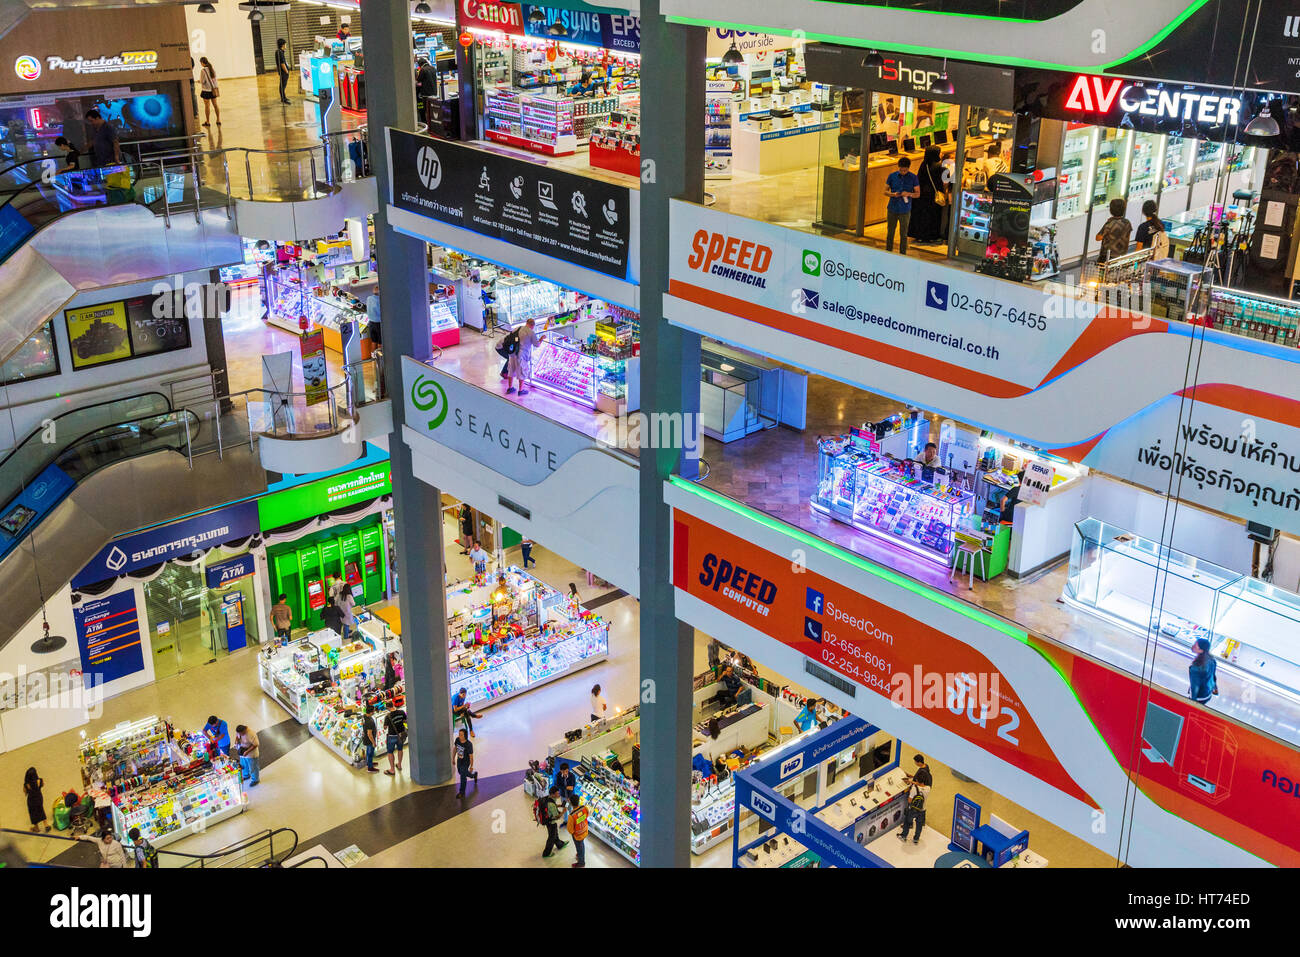 BANGKOK, THAILAND - JANUARY 30: This is Pantip Plaza electronics mall a well known electronics mall which stocks many major brands of consumer electro Stock Photo